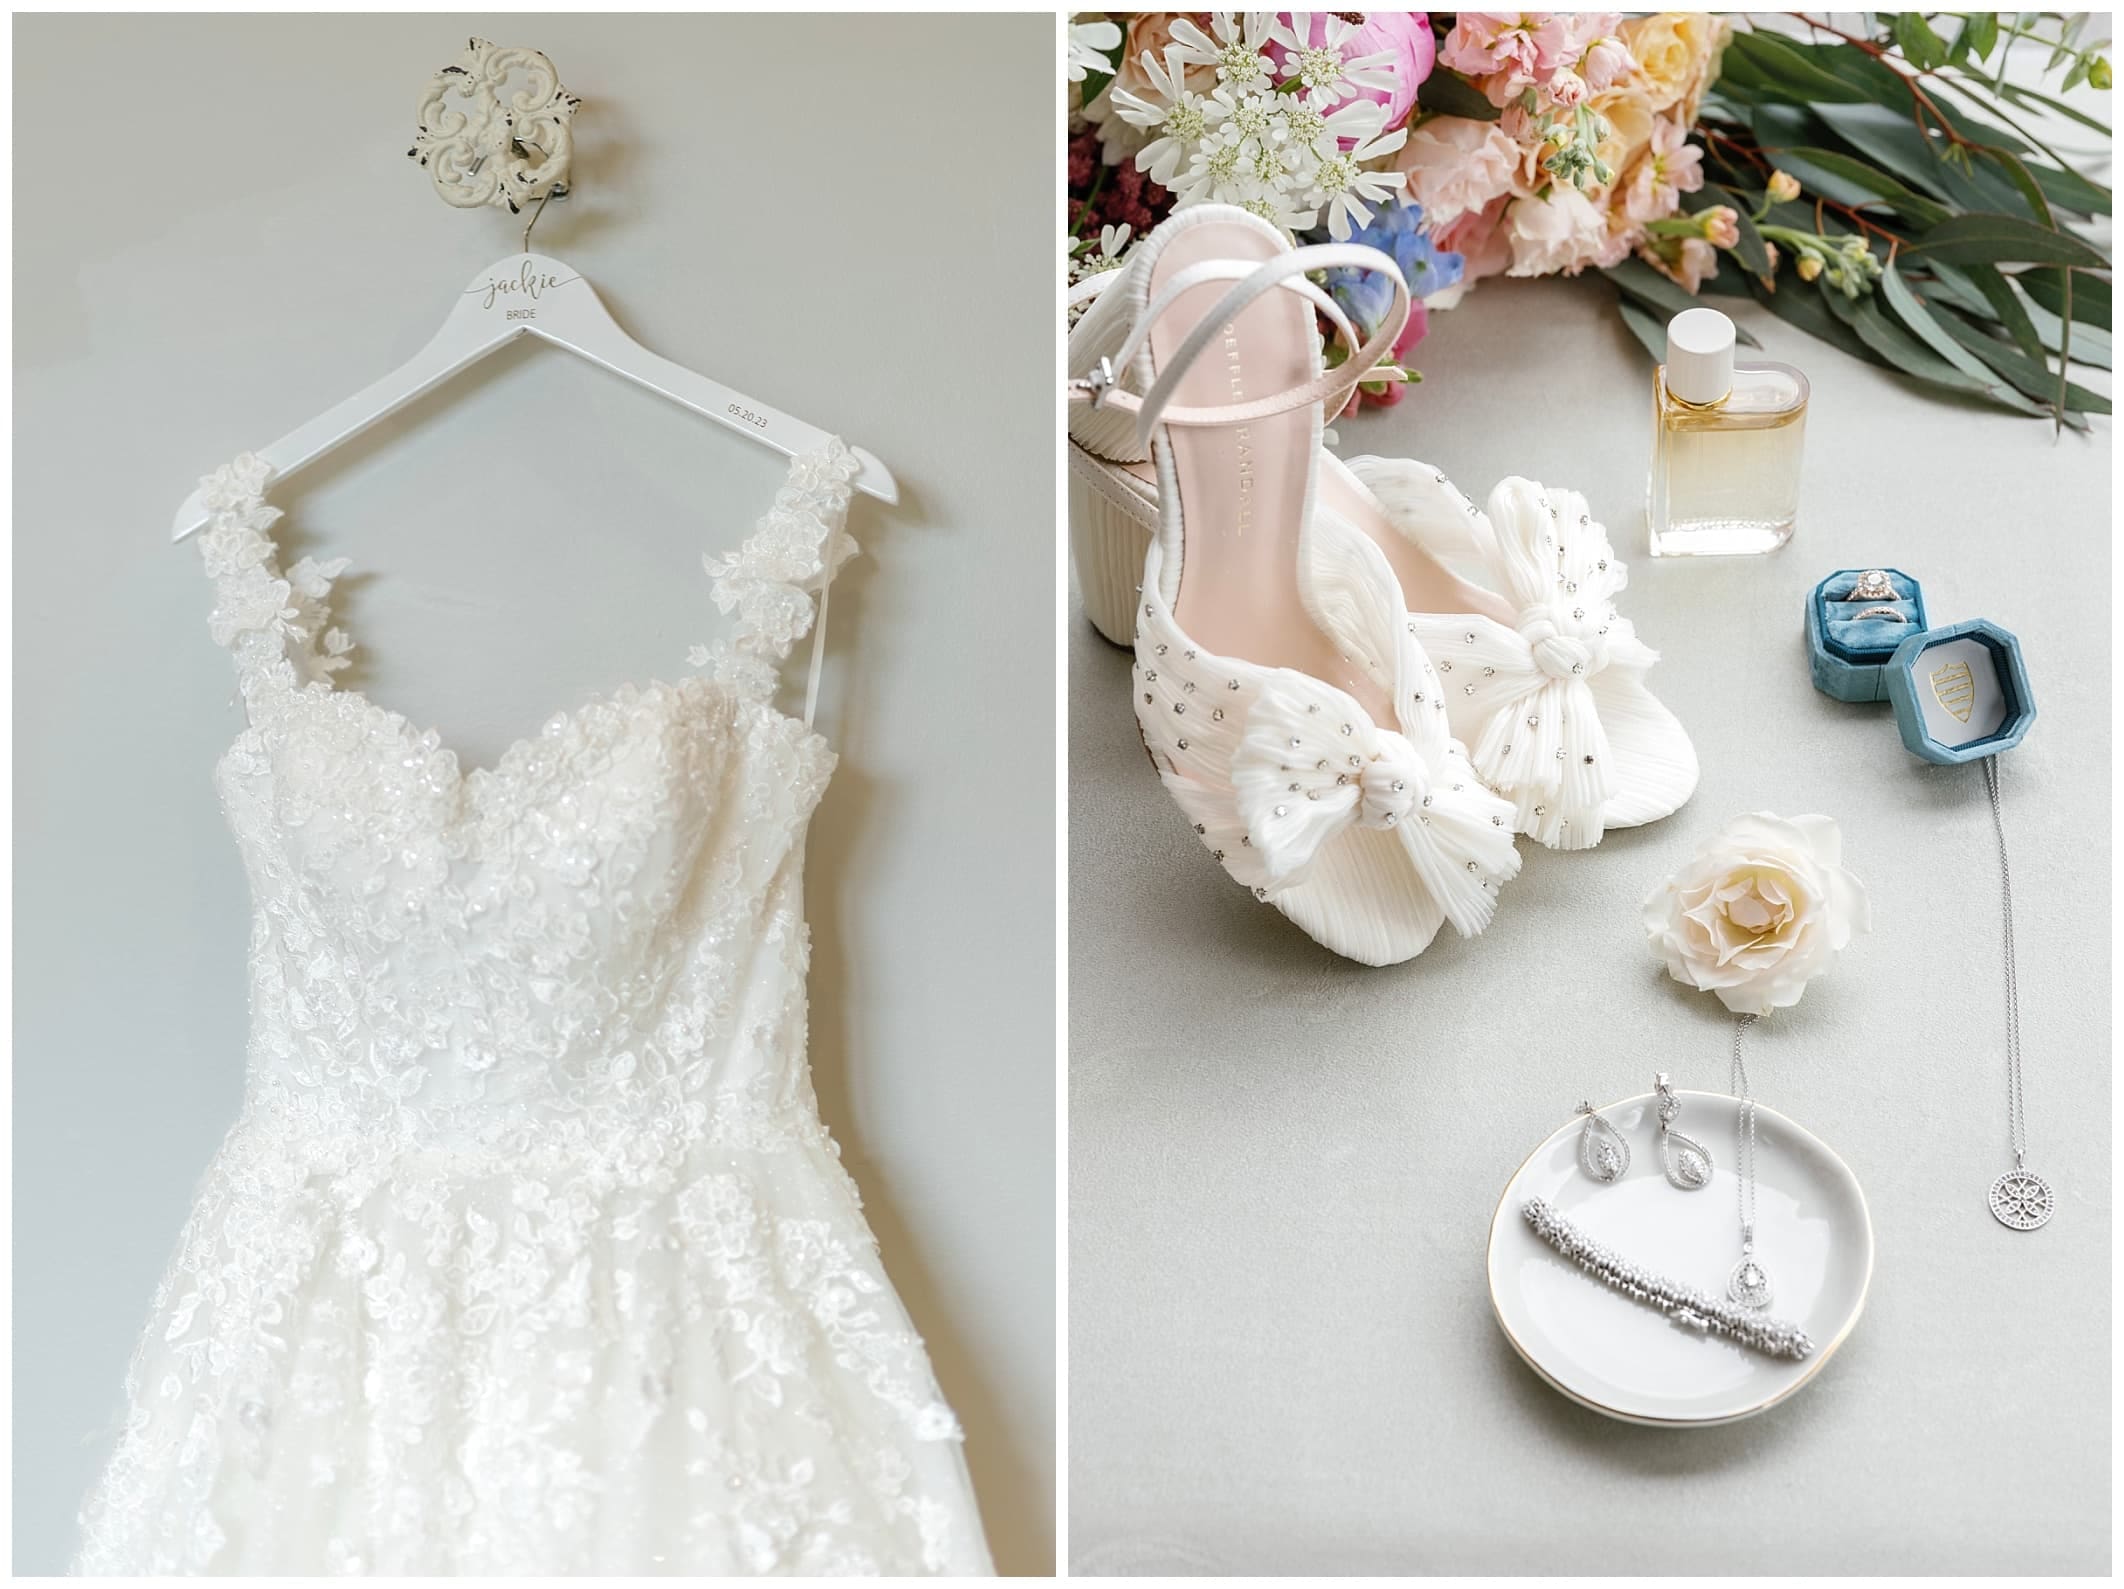 Brides dress and wedding details at spring wedding with blue accents